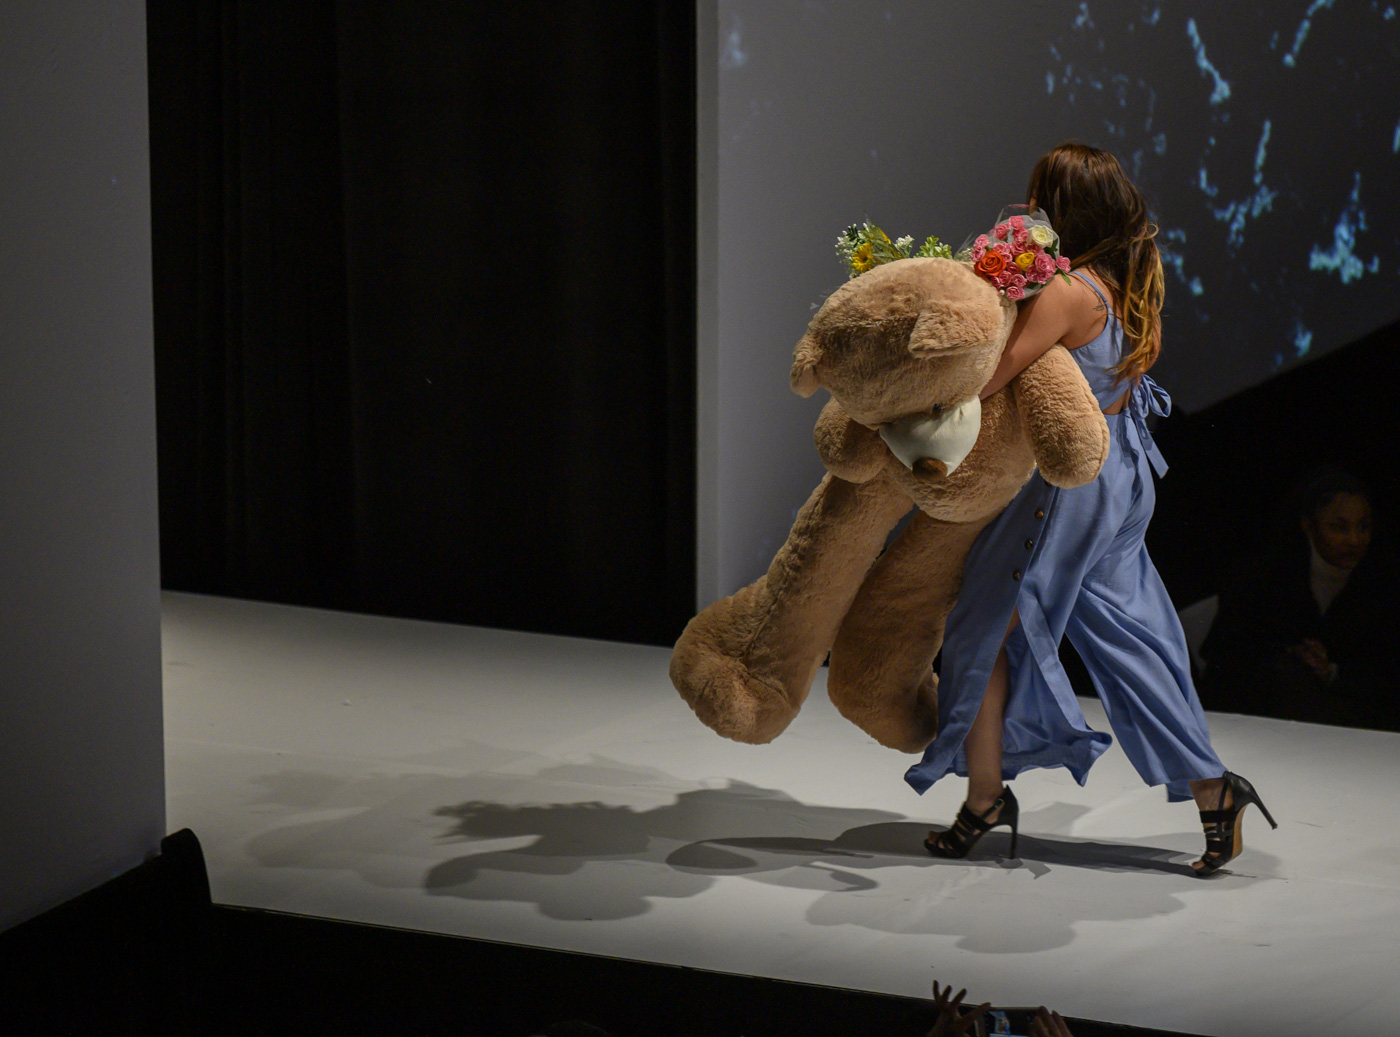 A designer leave the stage with a large teddy bear.